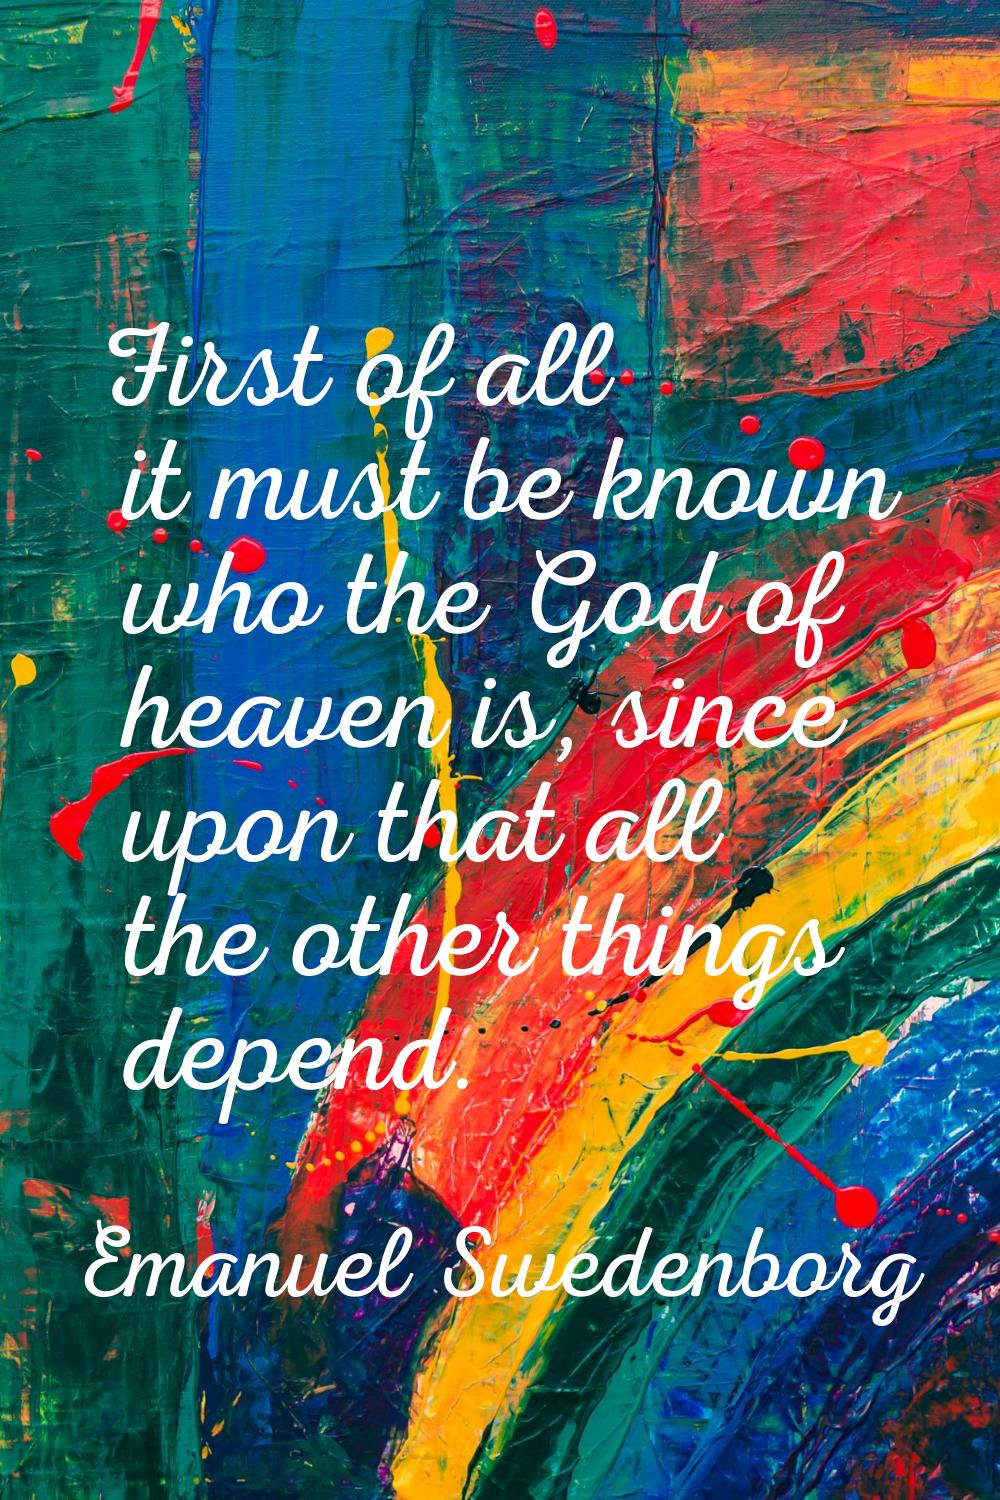 First of all it must be known who the God of heaven is, since upon that all the other things depend